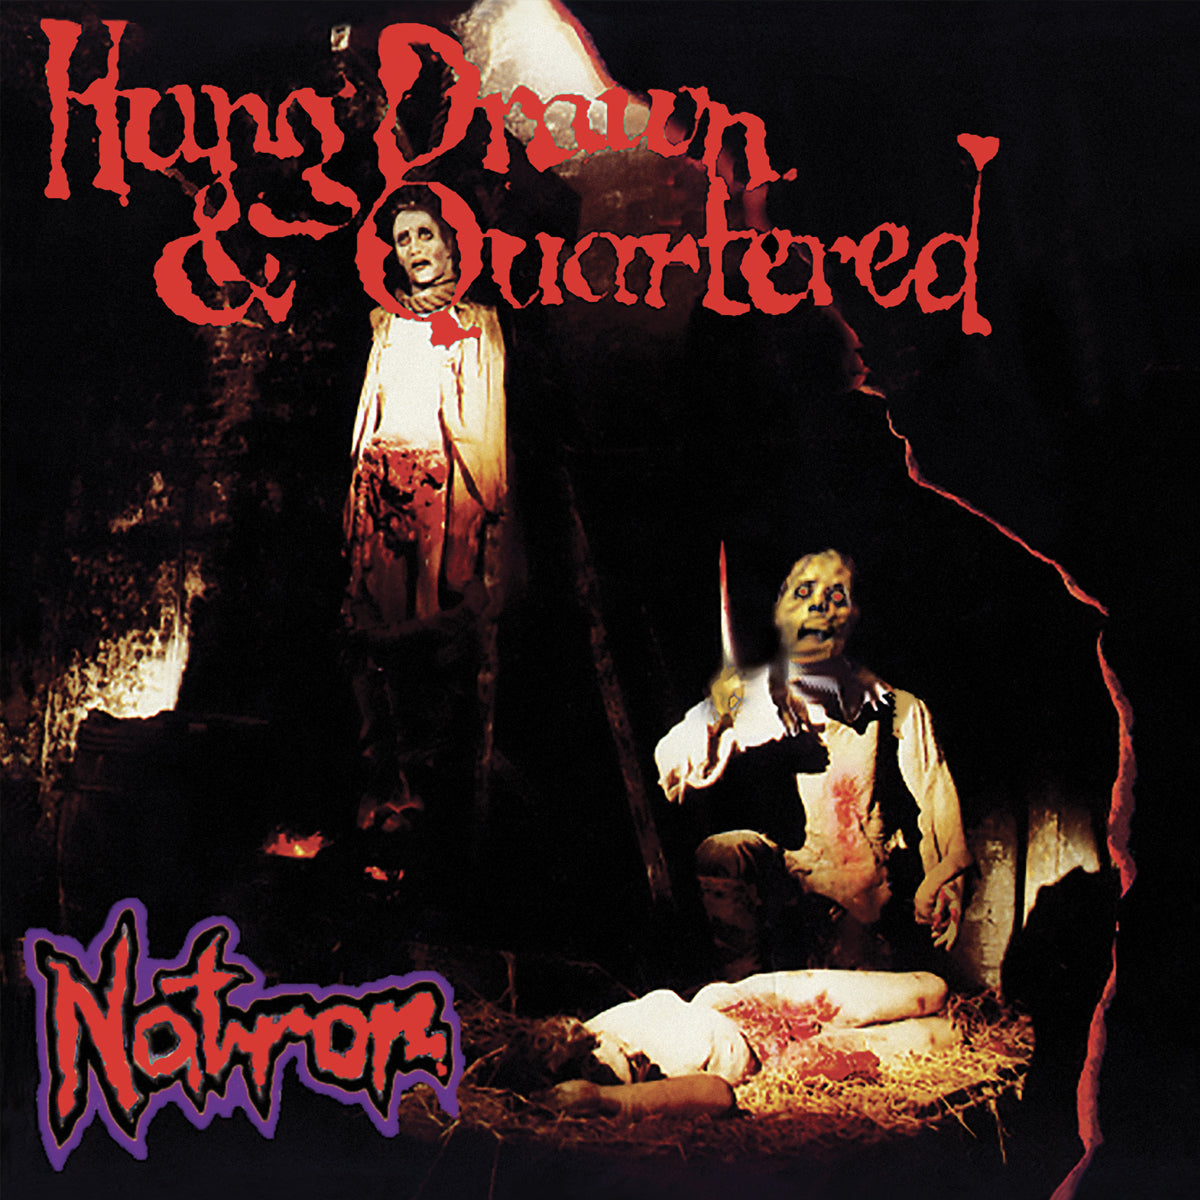 Natron "Hung Drawn & Quartered" LP 12" RE-ISSUE